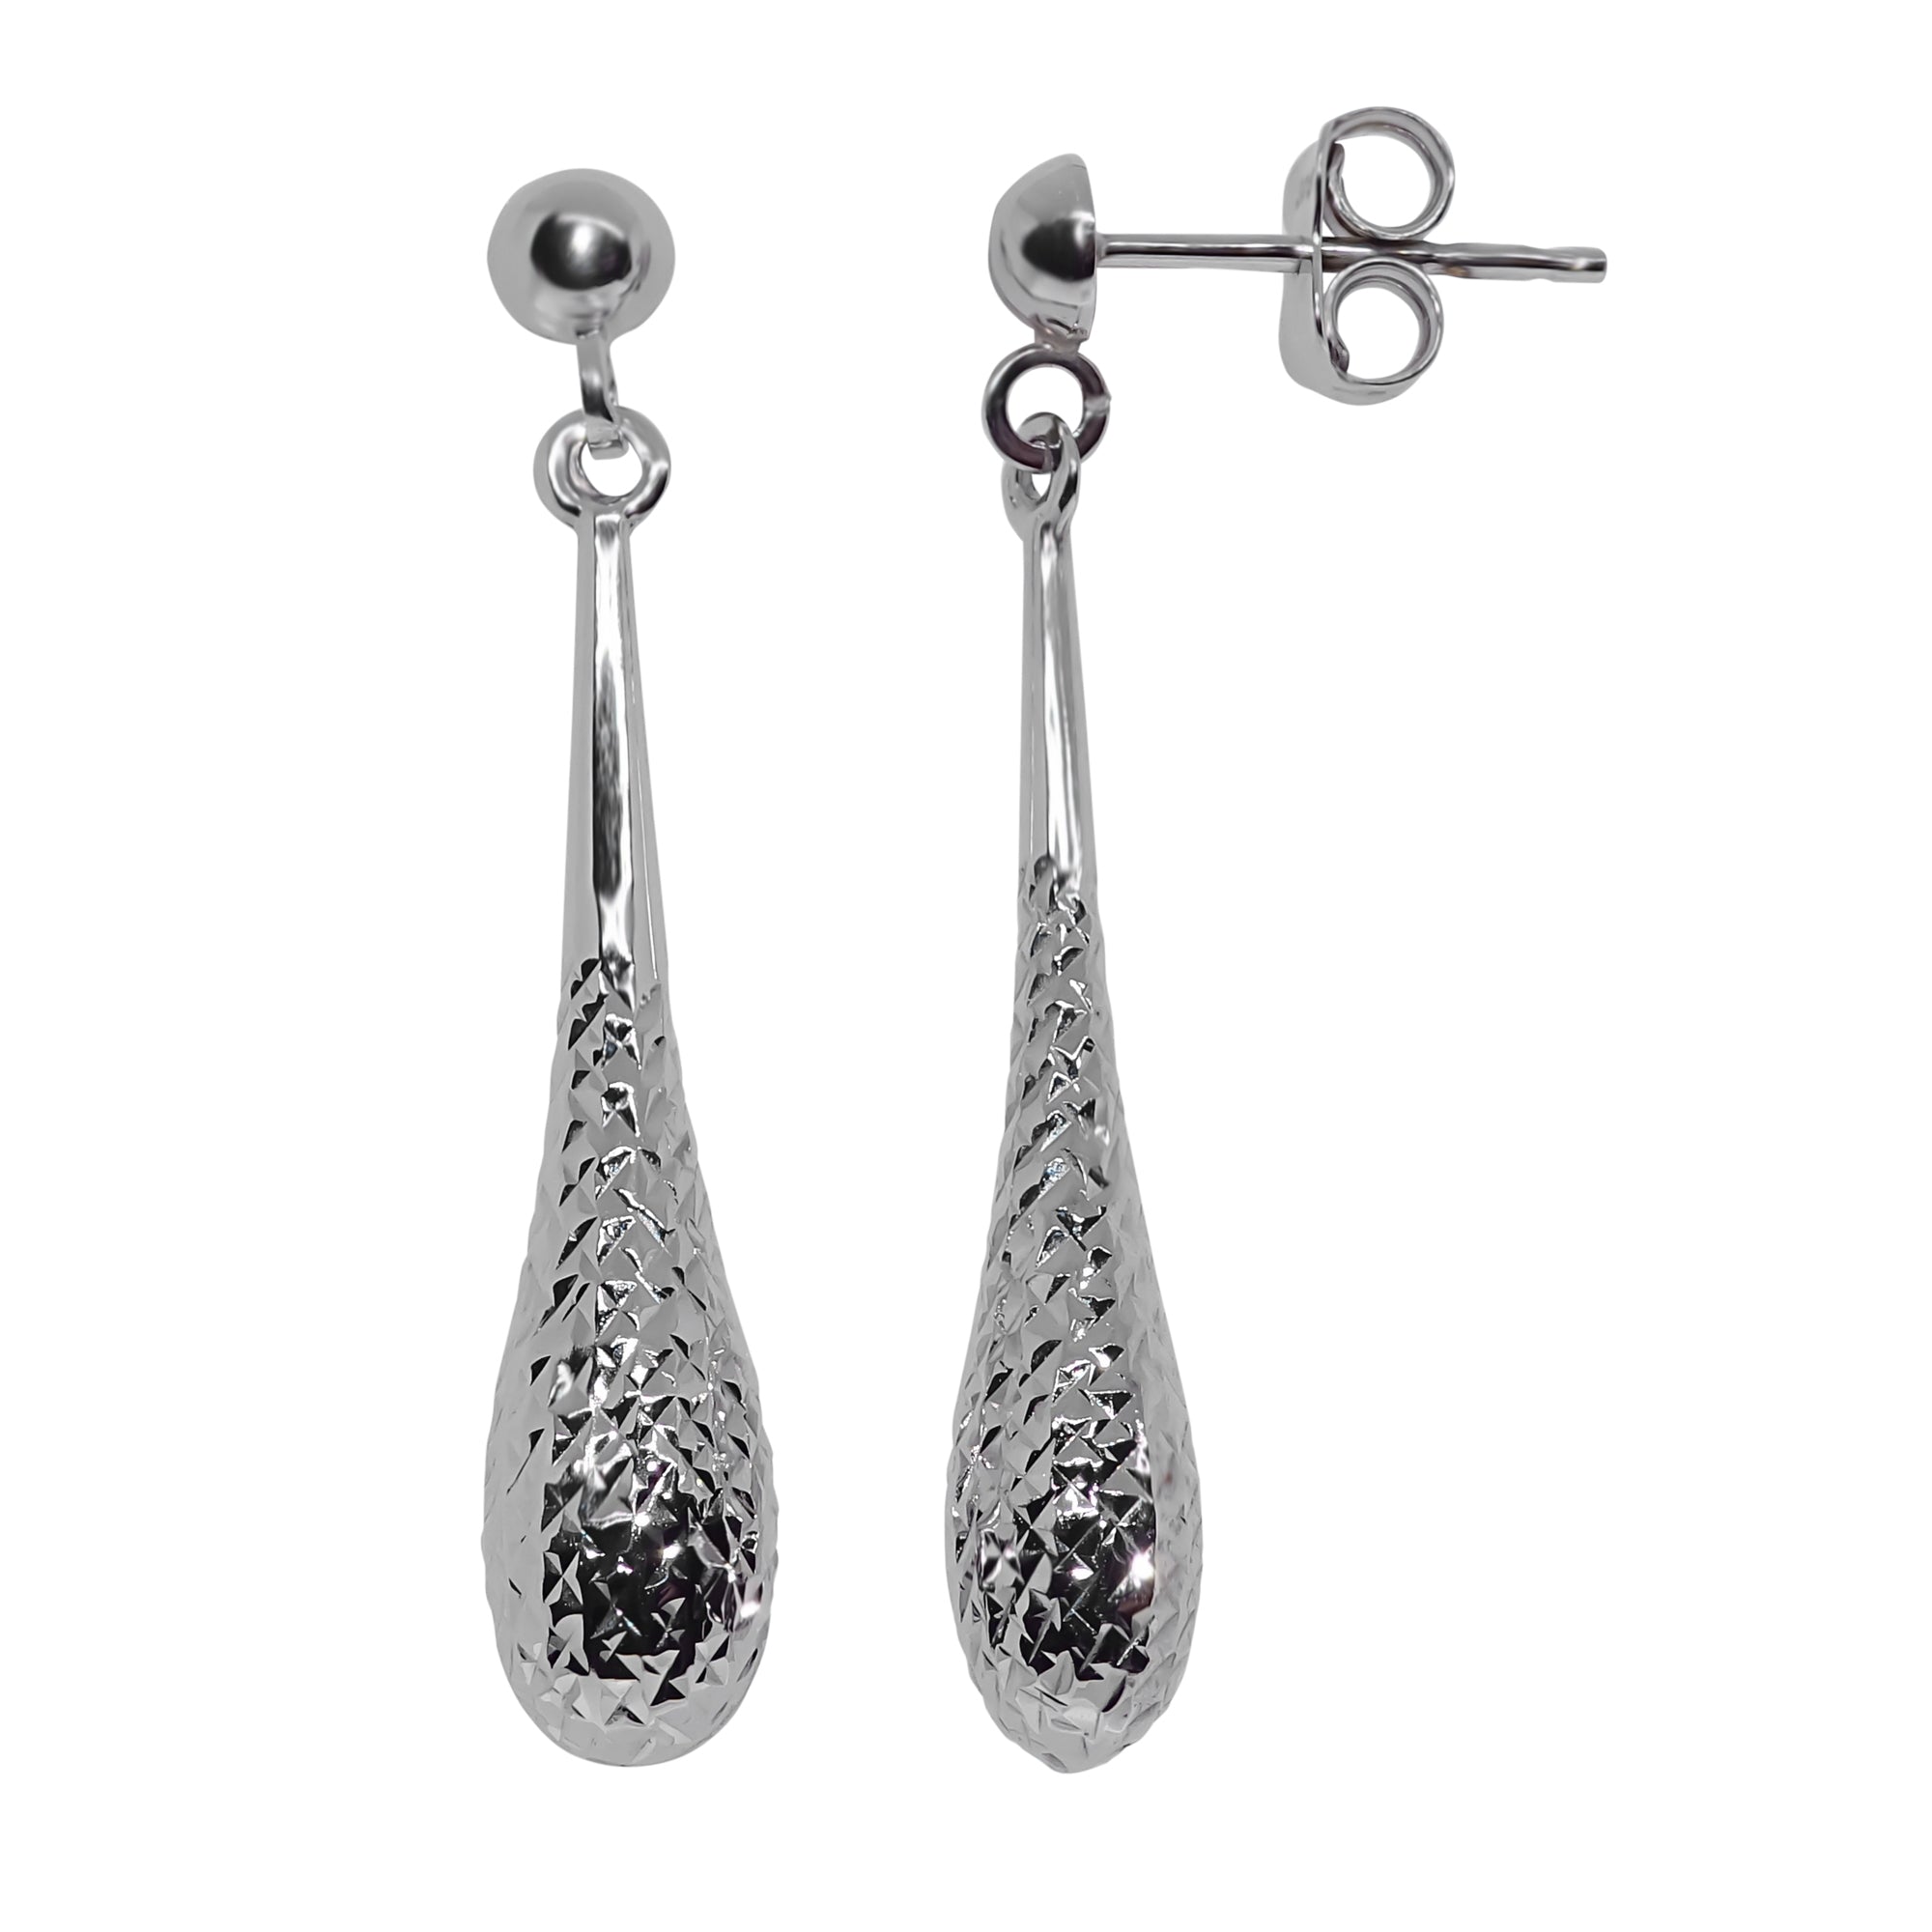 9ct white gold 26mm patterned drop earrings